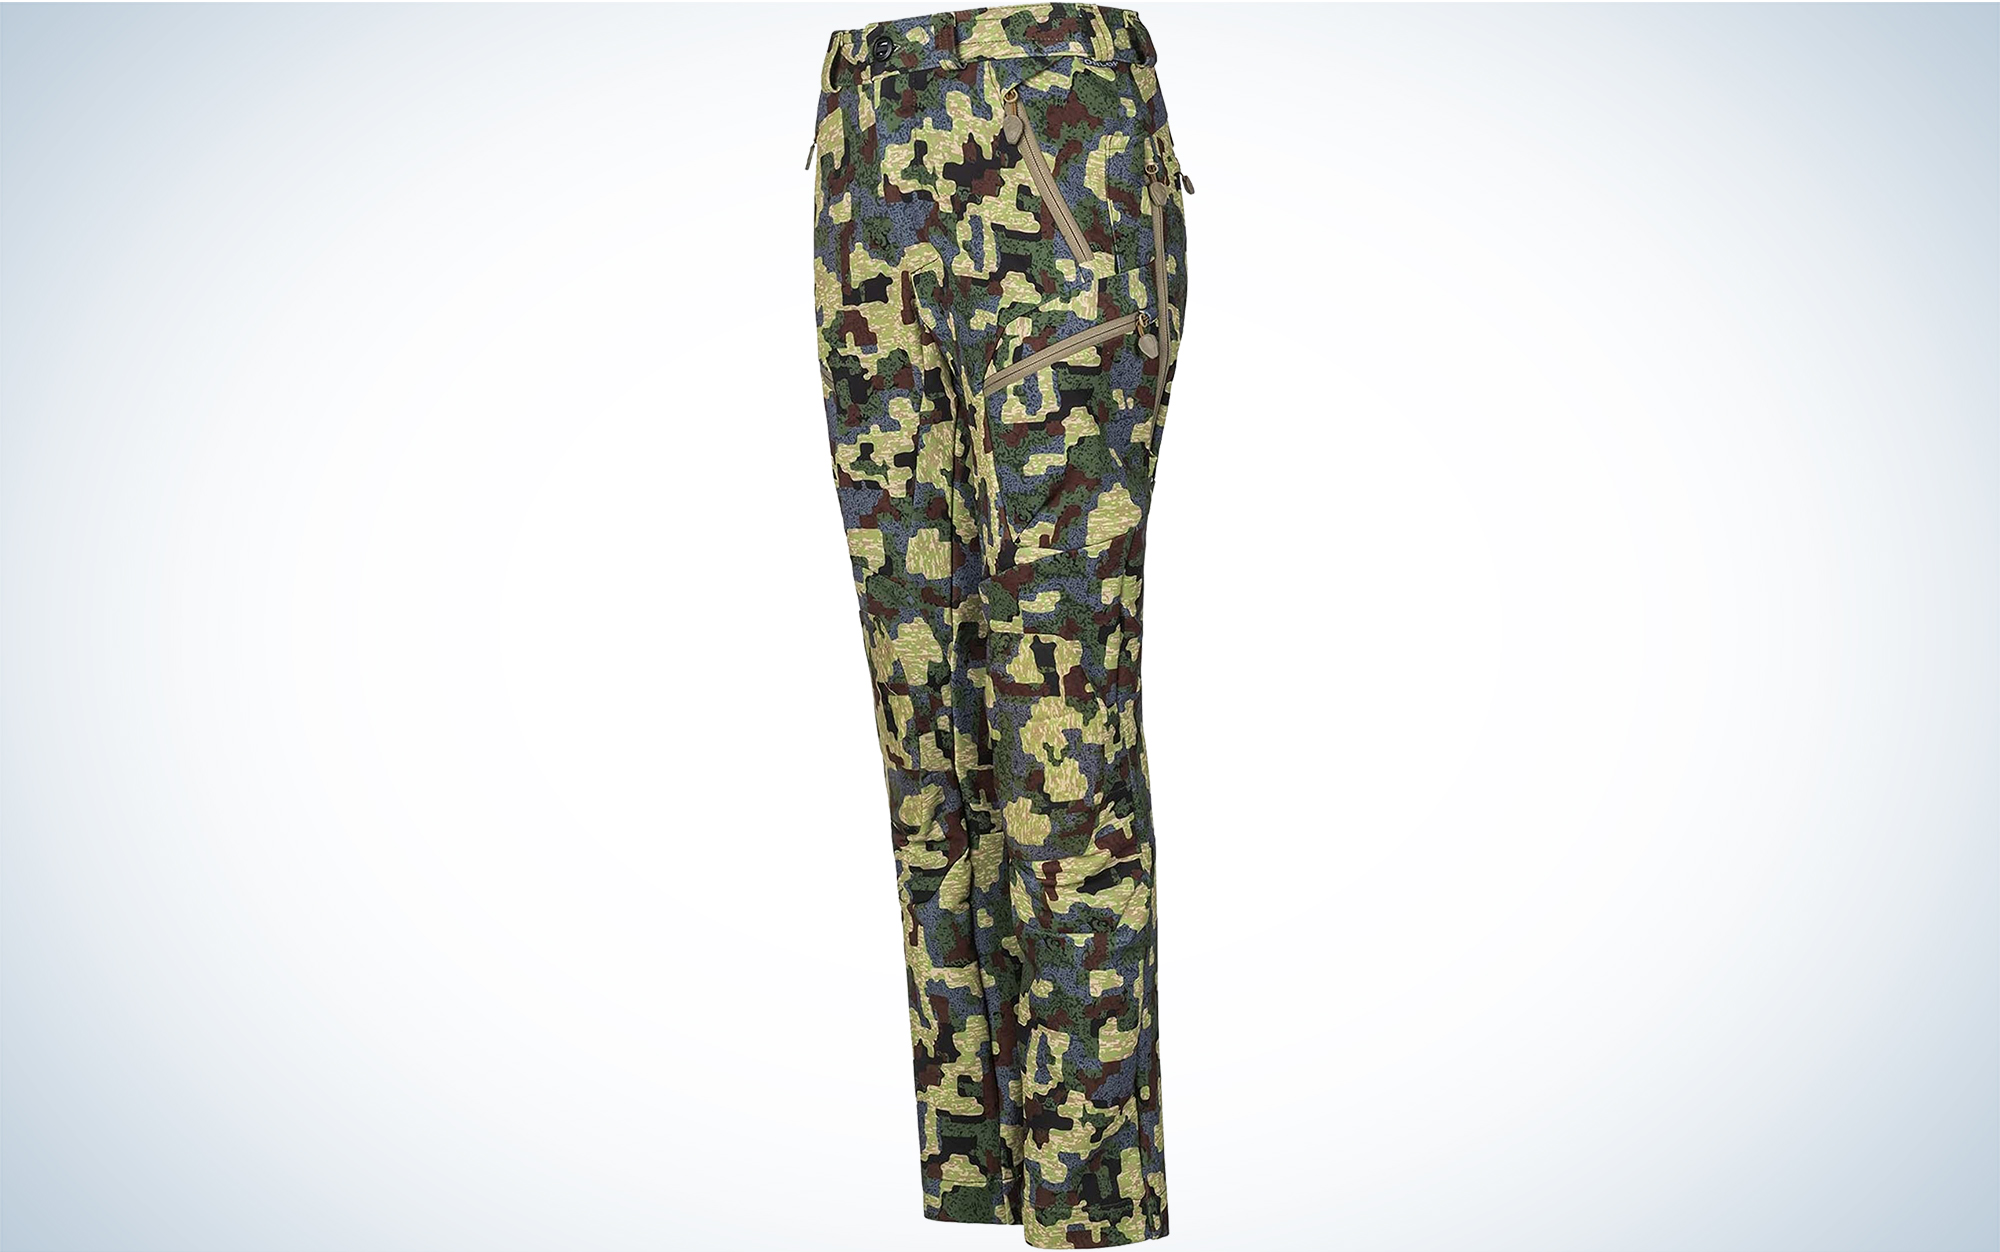 The FORLOH AllClima pants are the best hunting pants to splurge on.